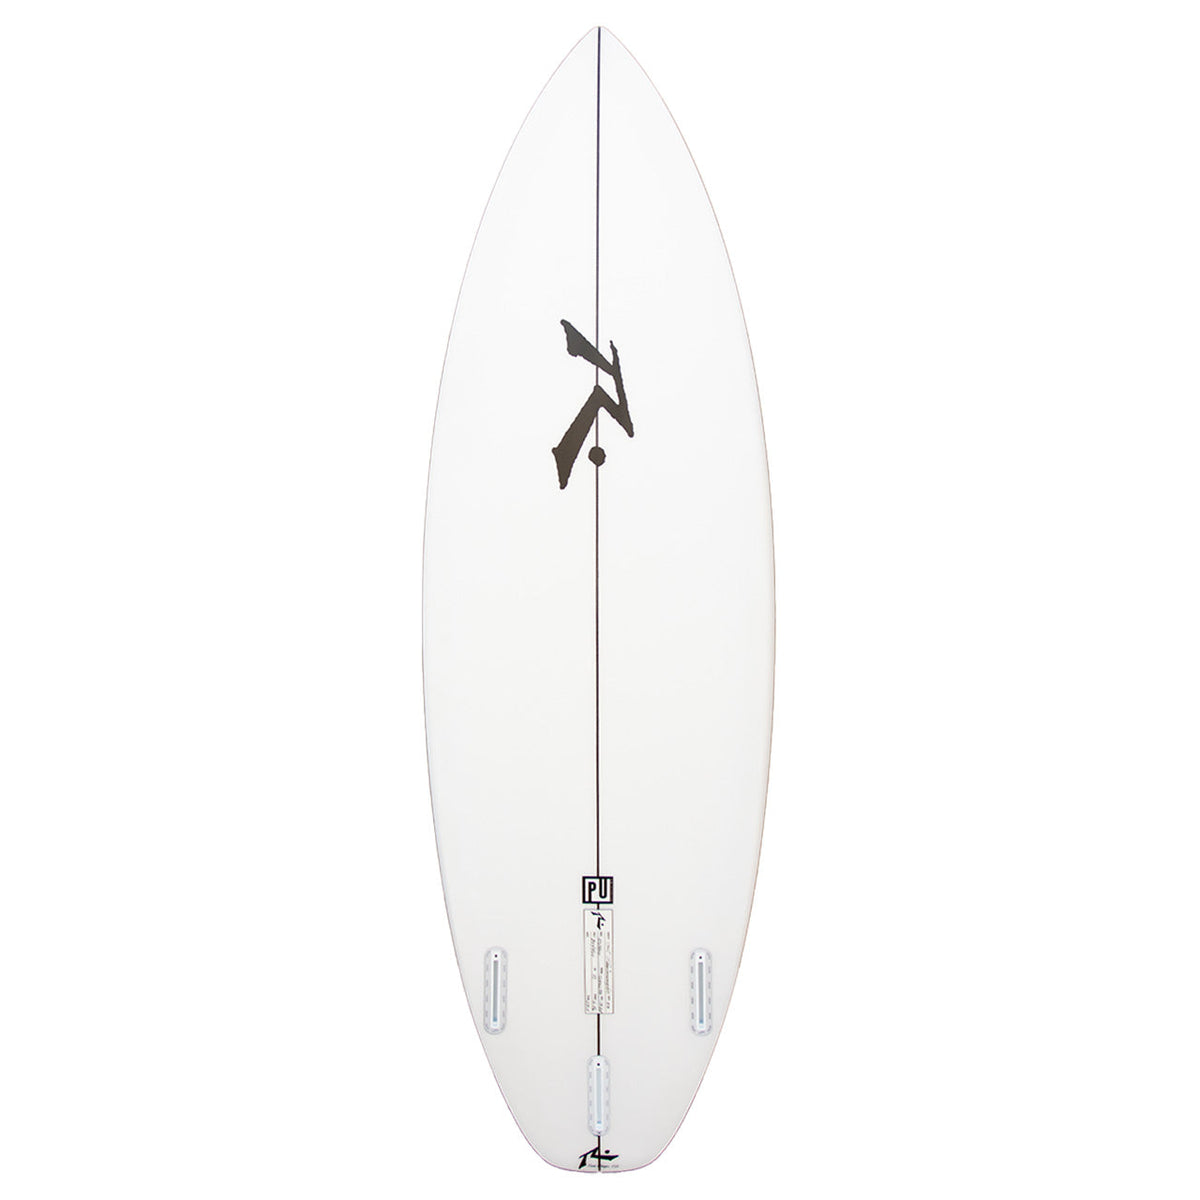 SD Grom Shortboard - Bottom View - Rusty Surfboards